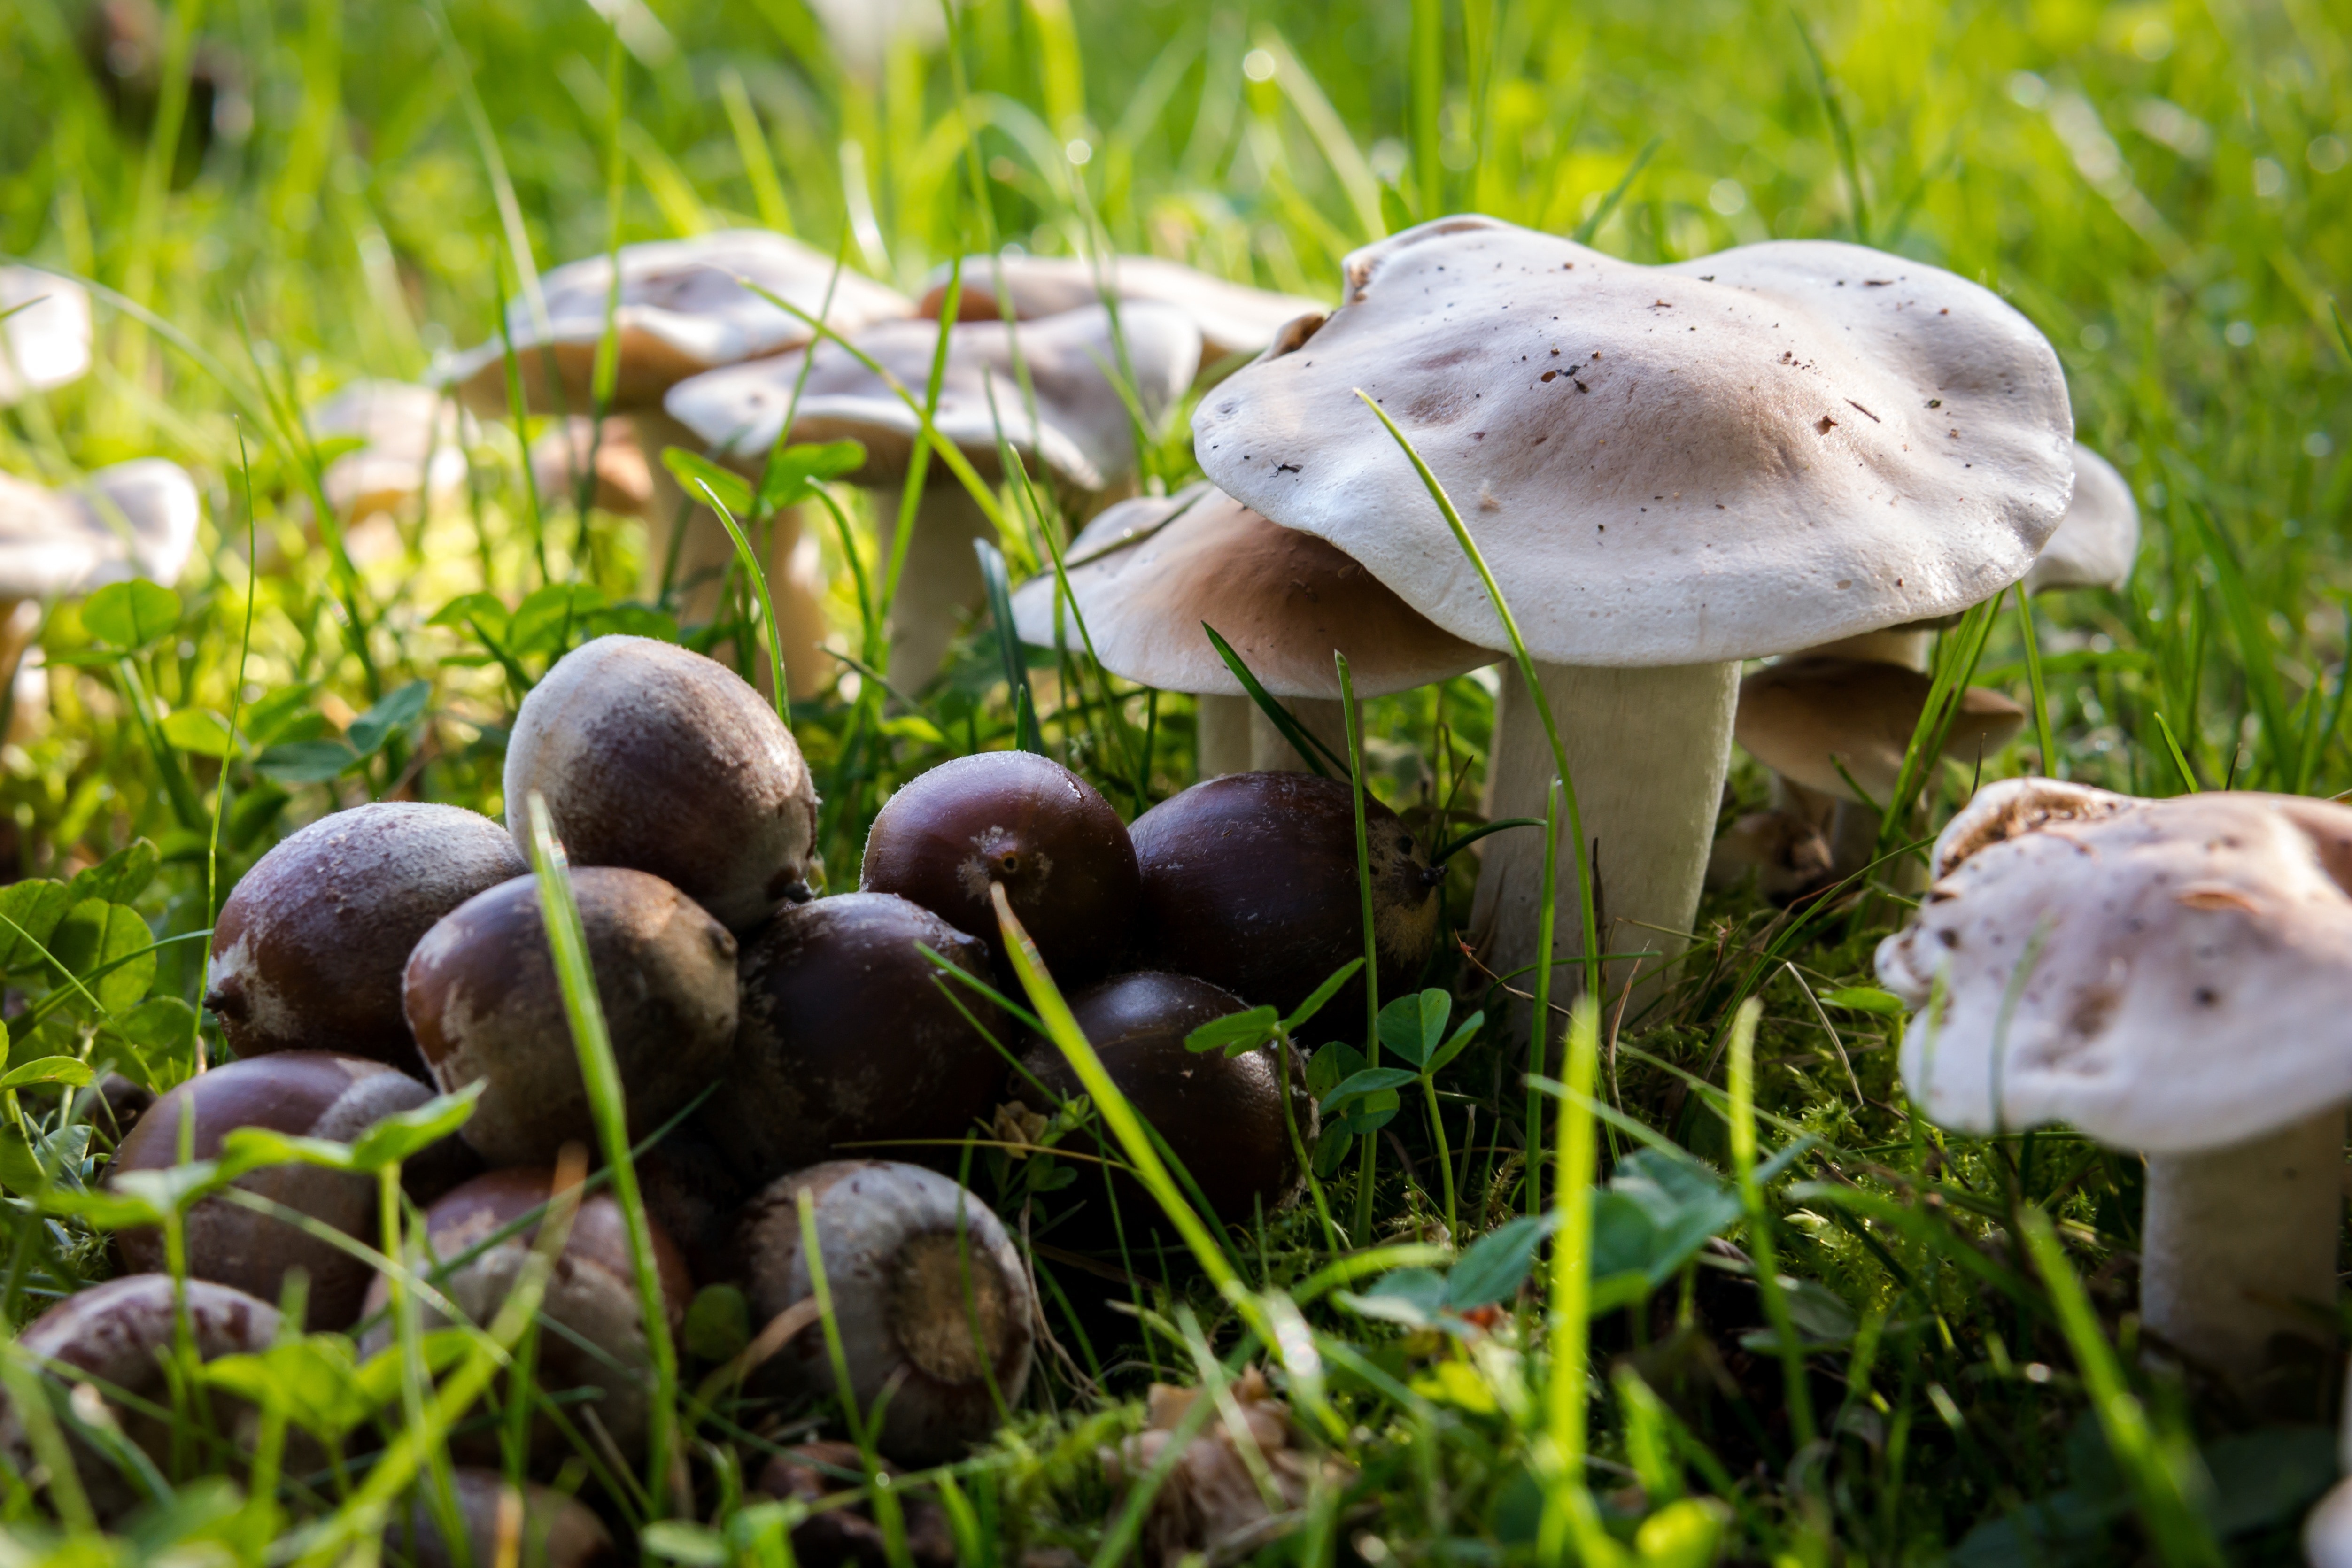 close up photo of white mushroom with purple fruits on green grass